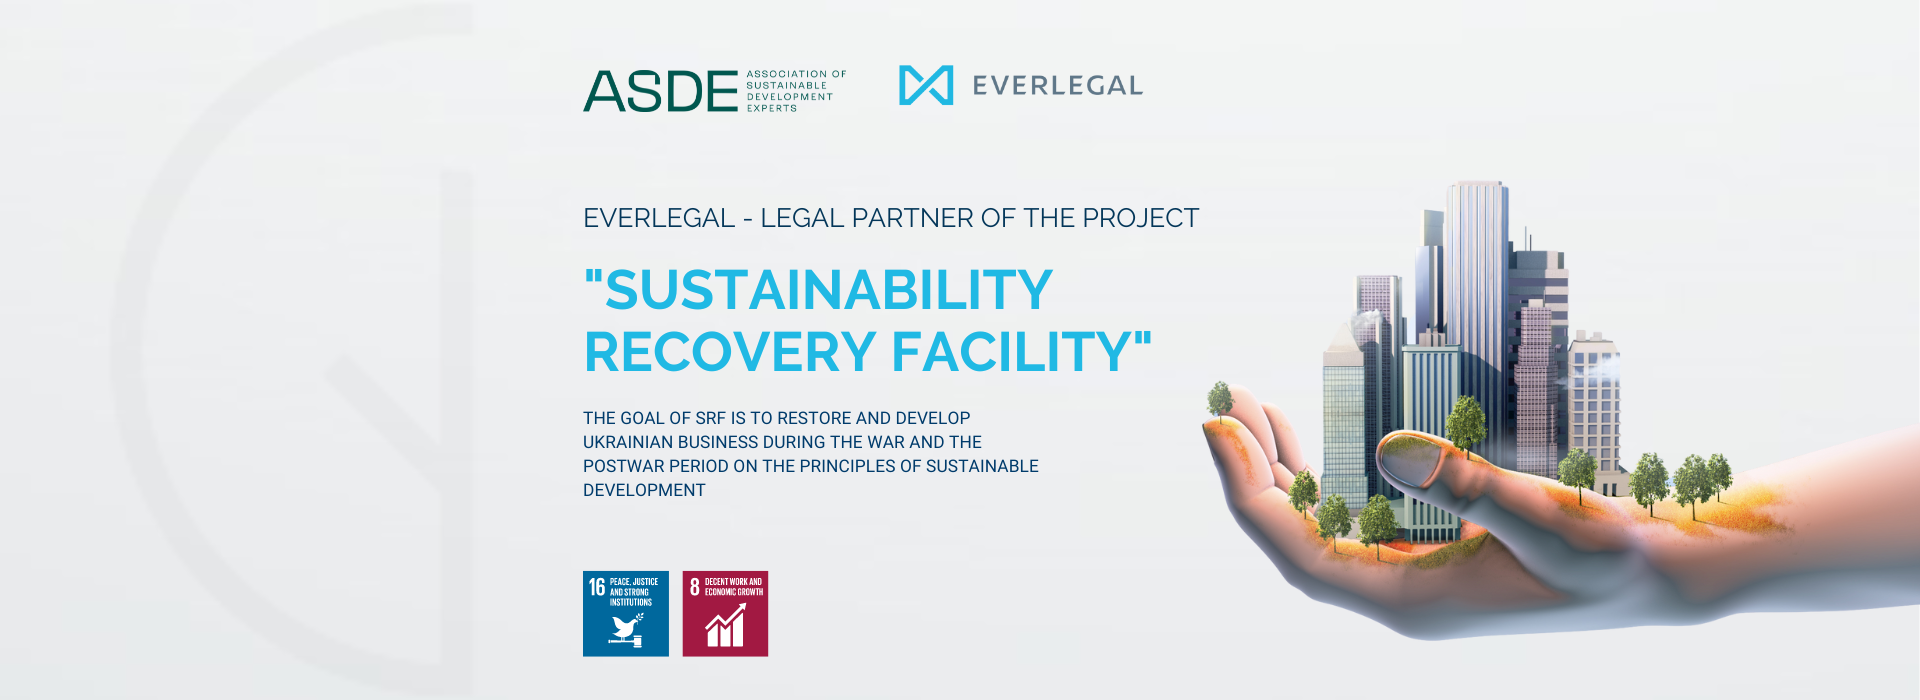 EVERLEGAL – Legal Partner of ASDE in “Sustainability Recovery Facility” Project